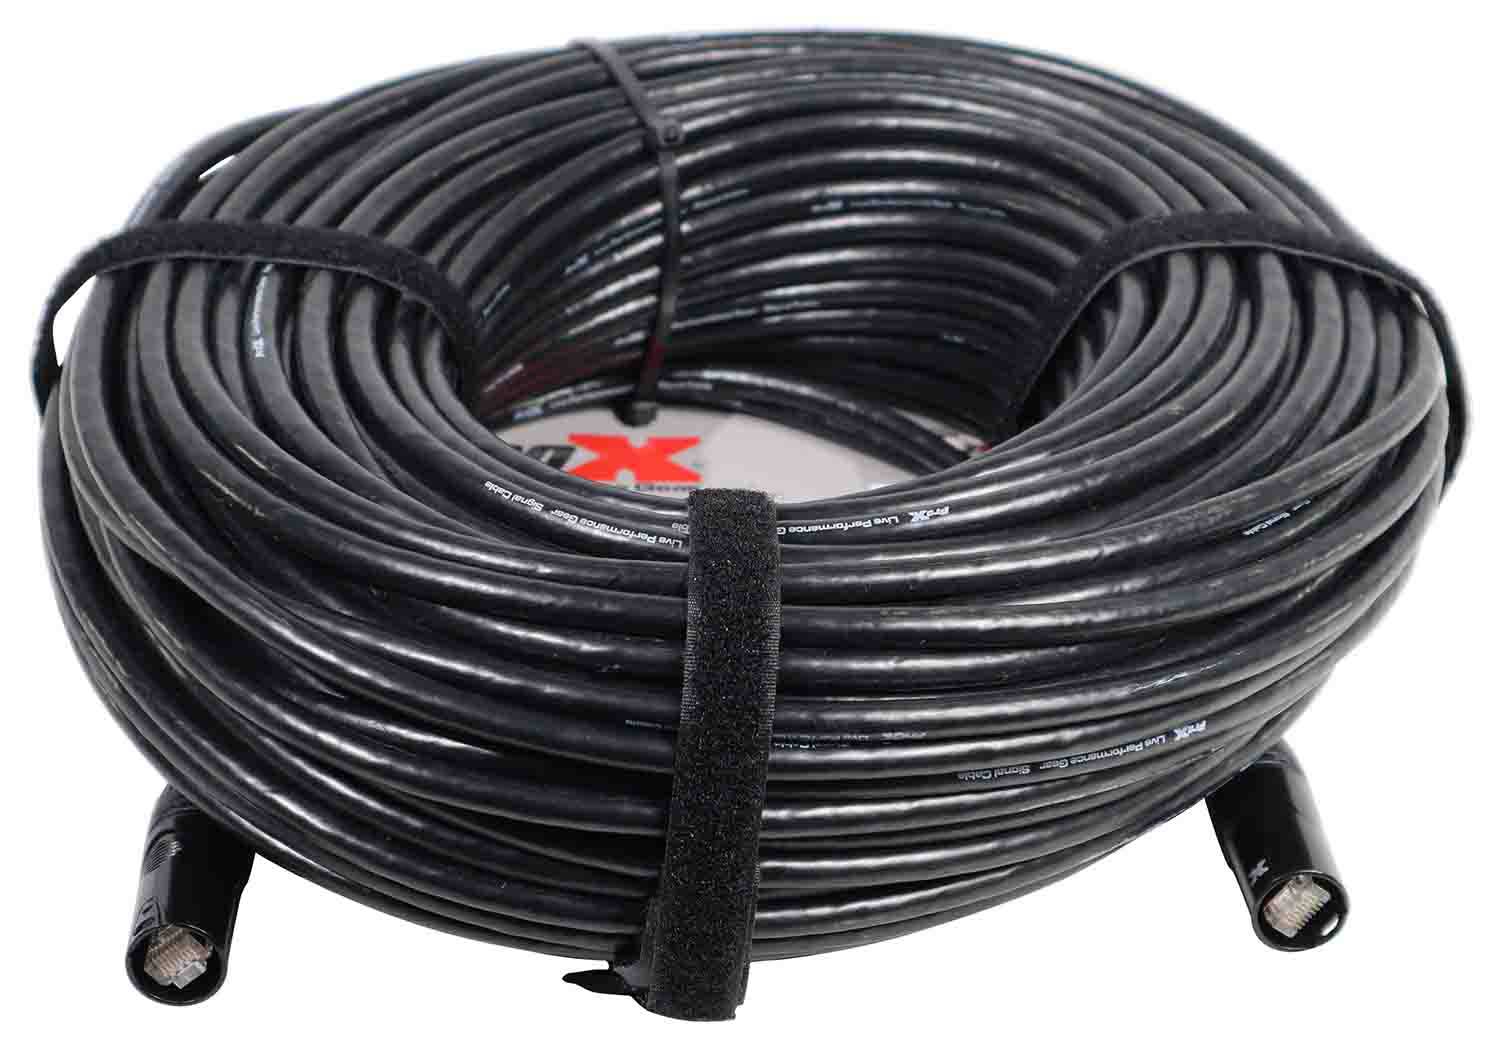 Prox XC-CAT6-200 STP Cat 6 Cable W-RJ45 for Network and Snake Box Connections - 200 Feet - Hollywood DJ